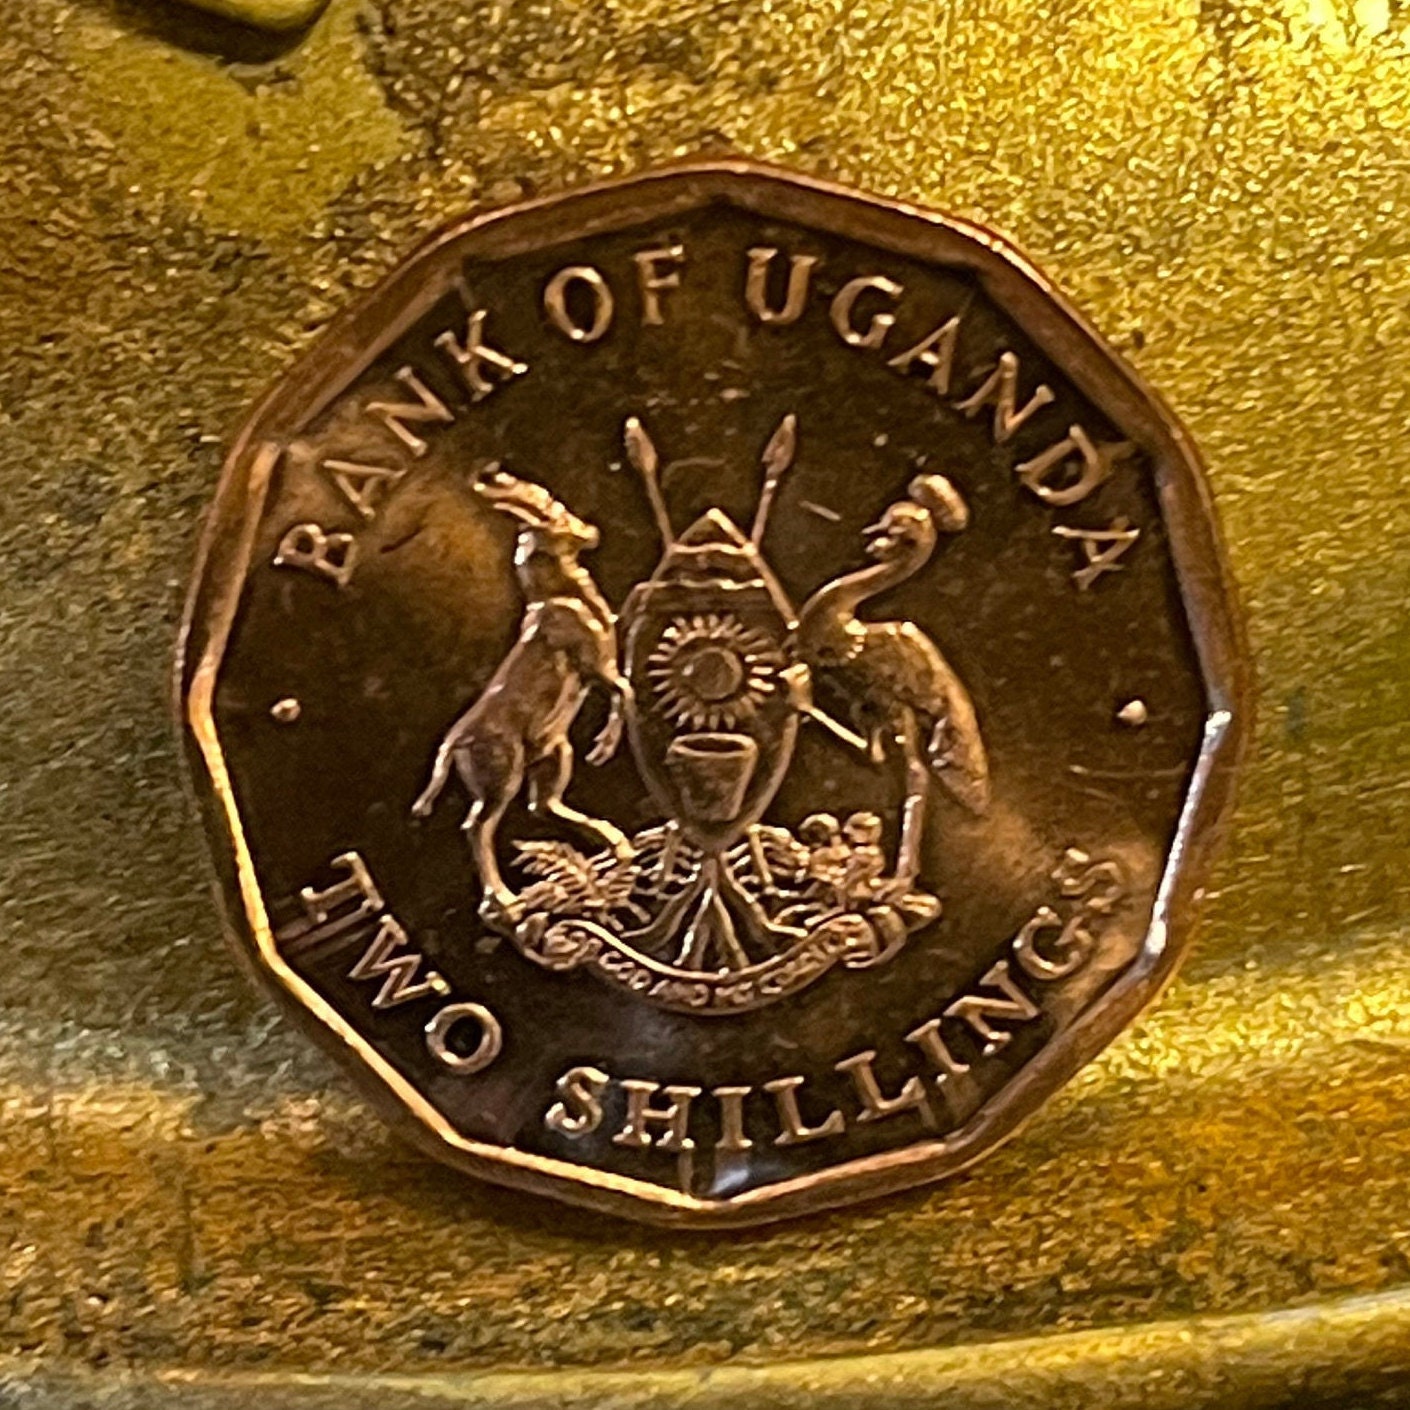 Cotton & Nuts 2 Shillings Uganda Authentic Coin Money for Jewelry and Craft Making